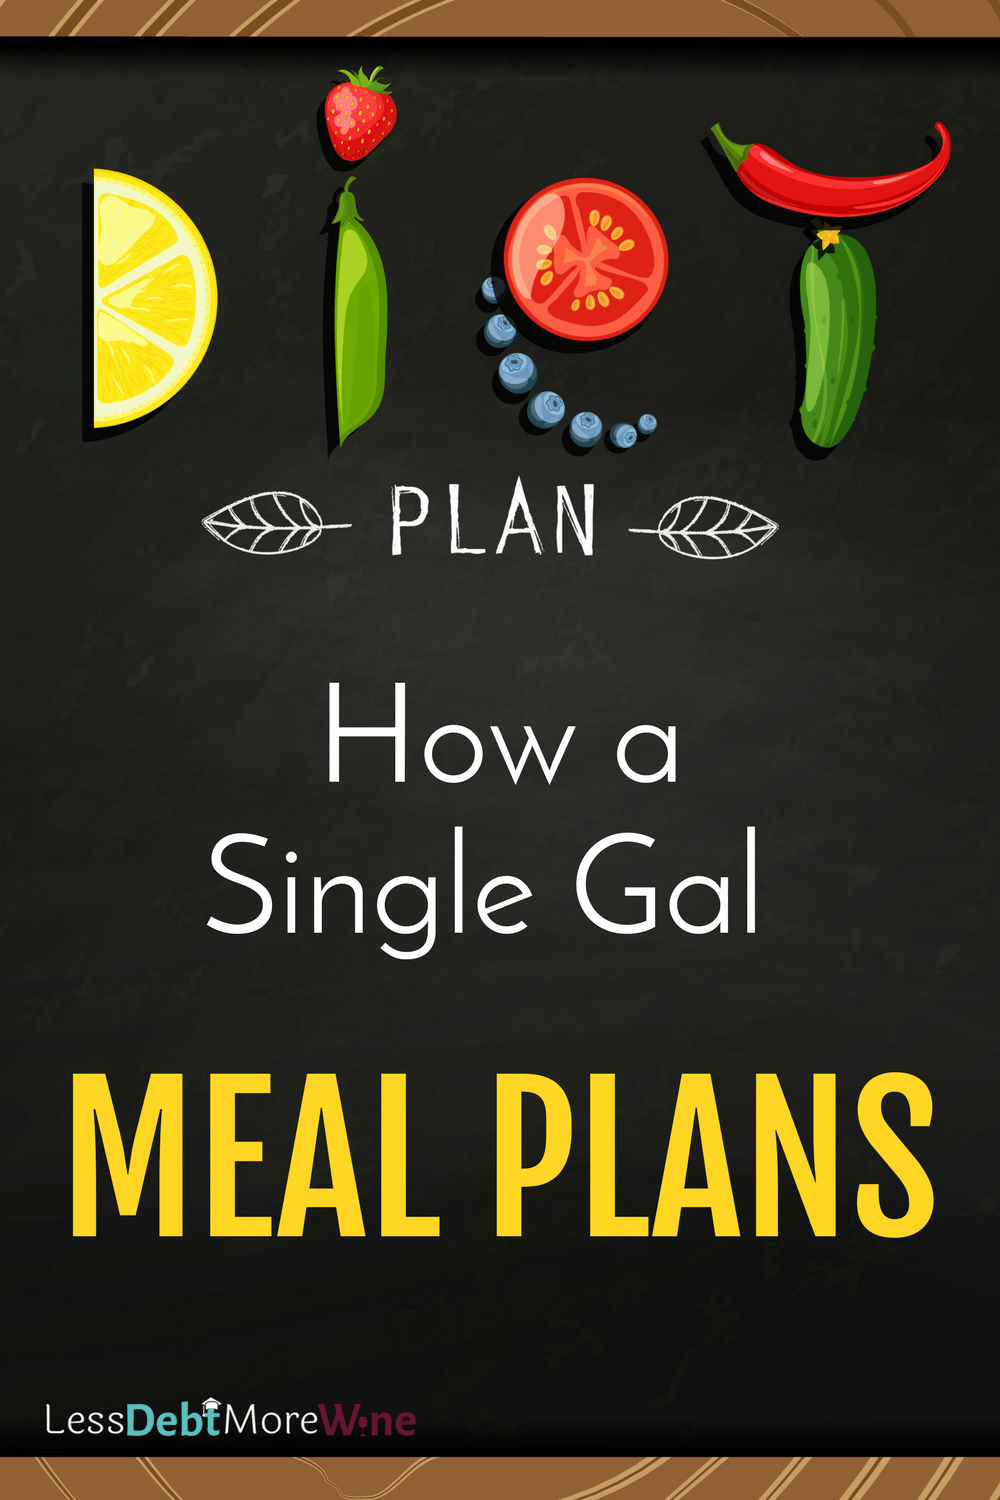 meal planning | meal planning for single people | how to meal plan | meal prep